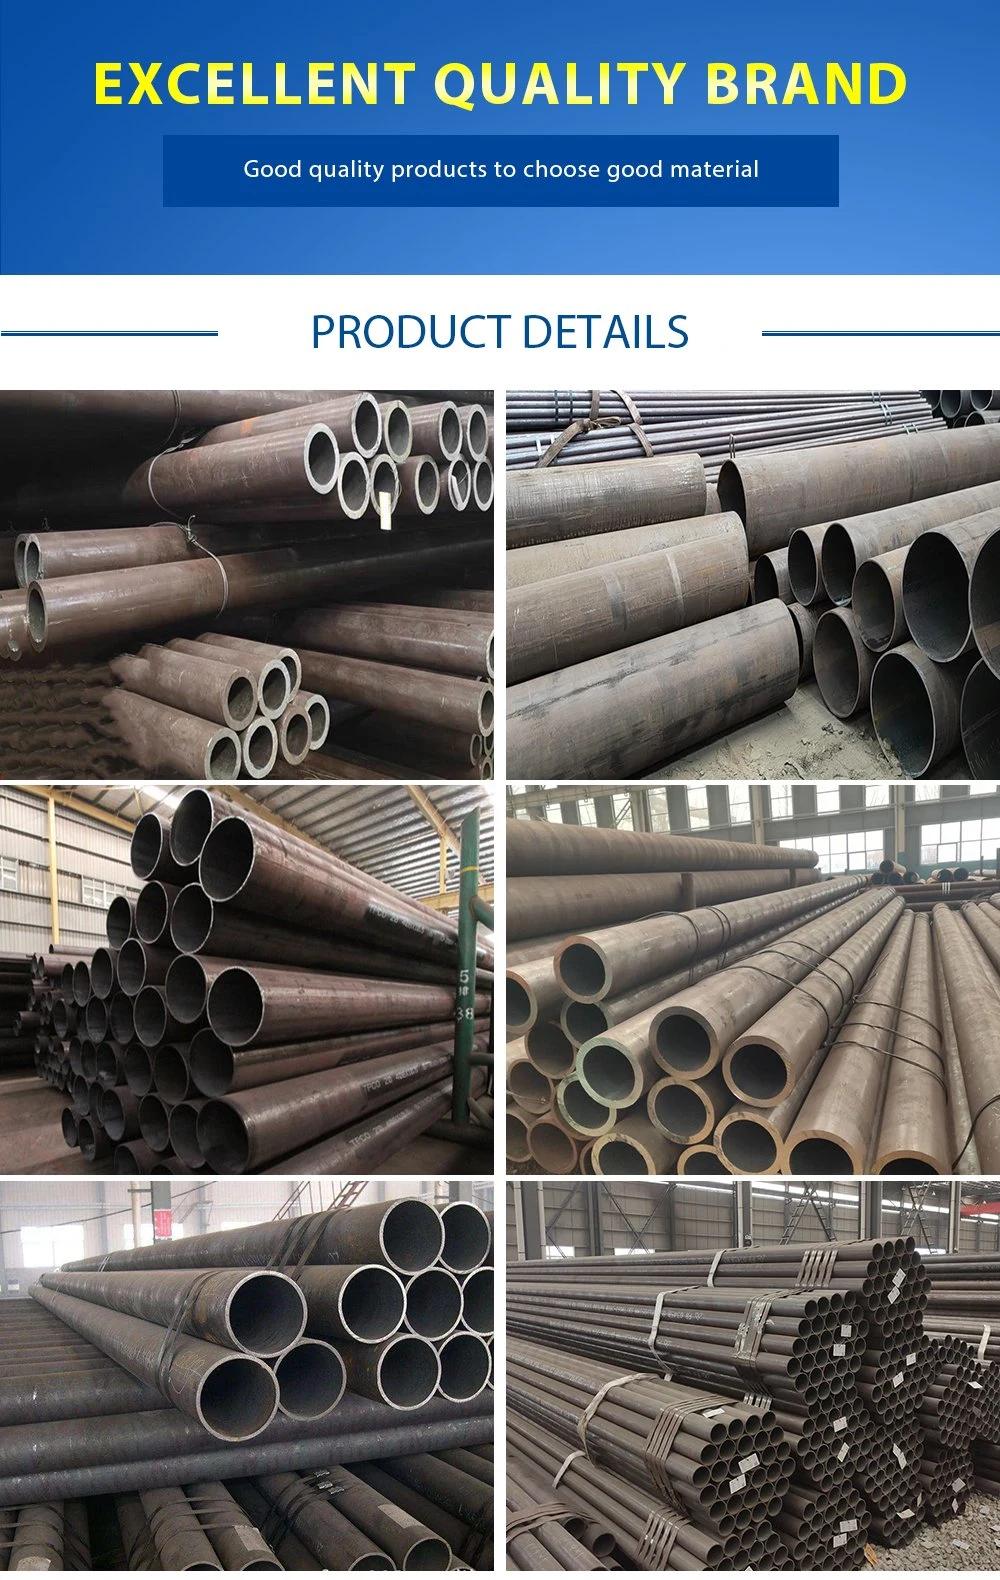 Q235 ASTM A106 Round Customized Non-Alloy Carbon Steel Tube